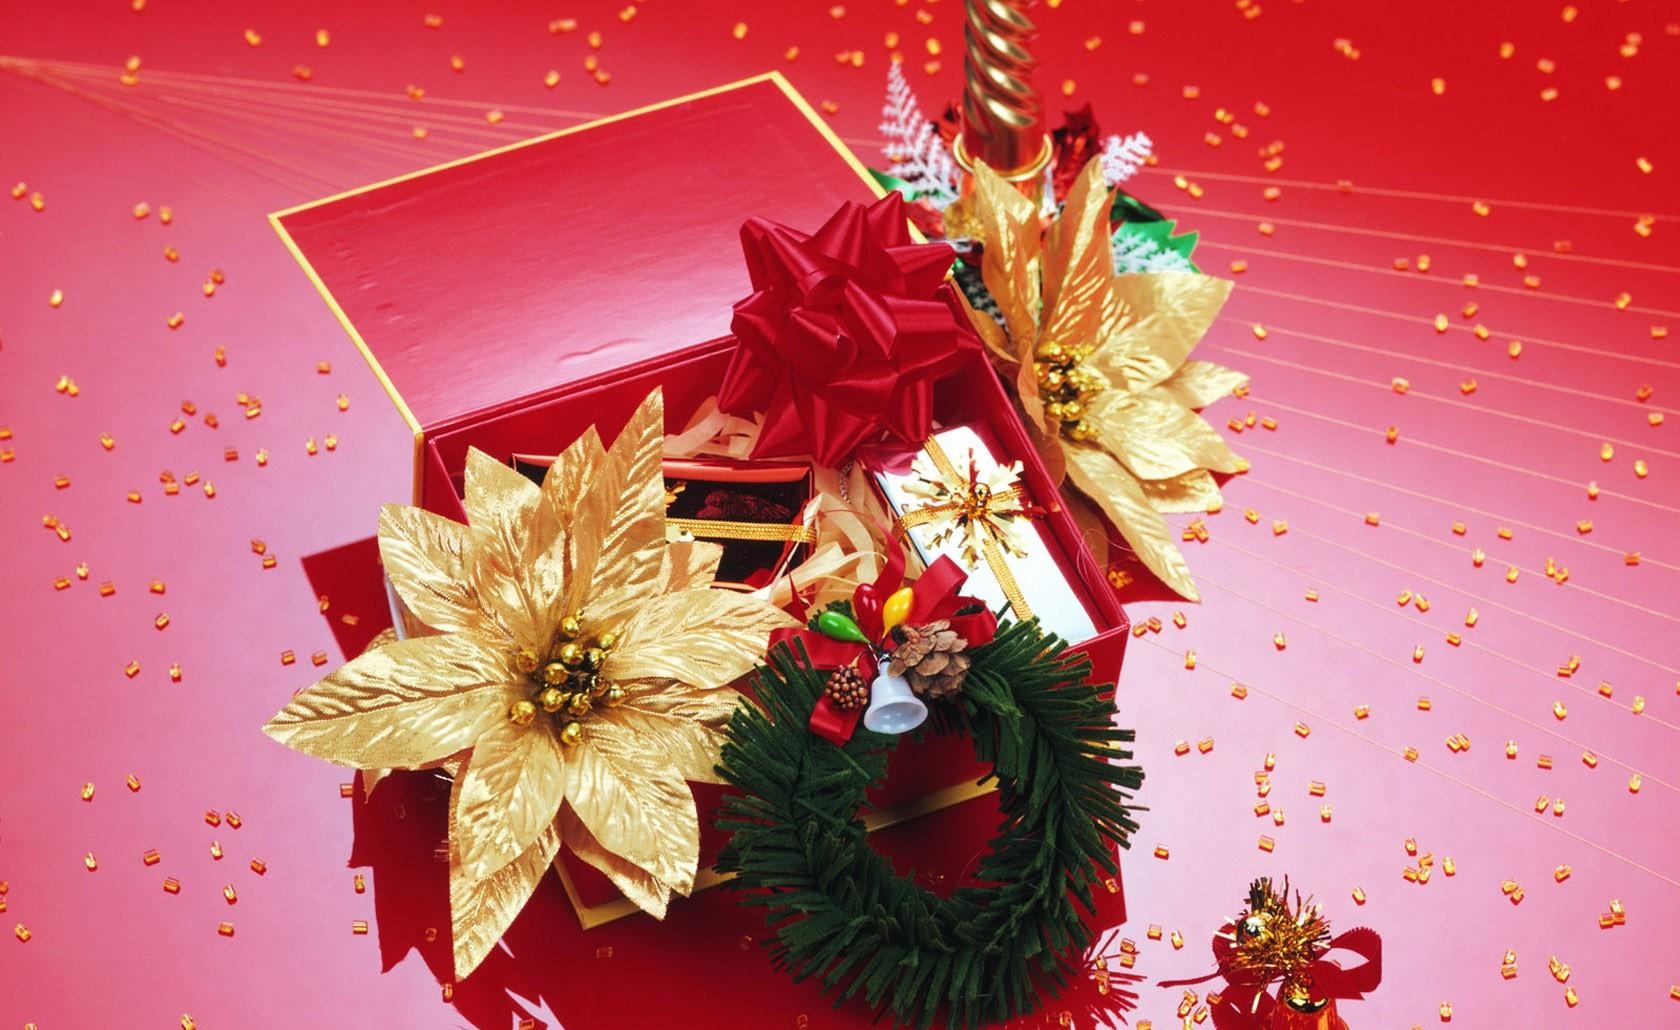 holidays, flowers, box, needles, wreath, presents, gifts images